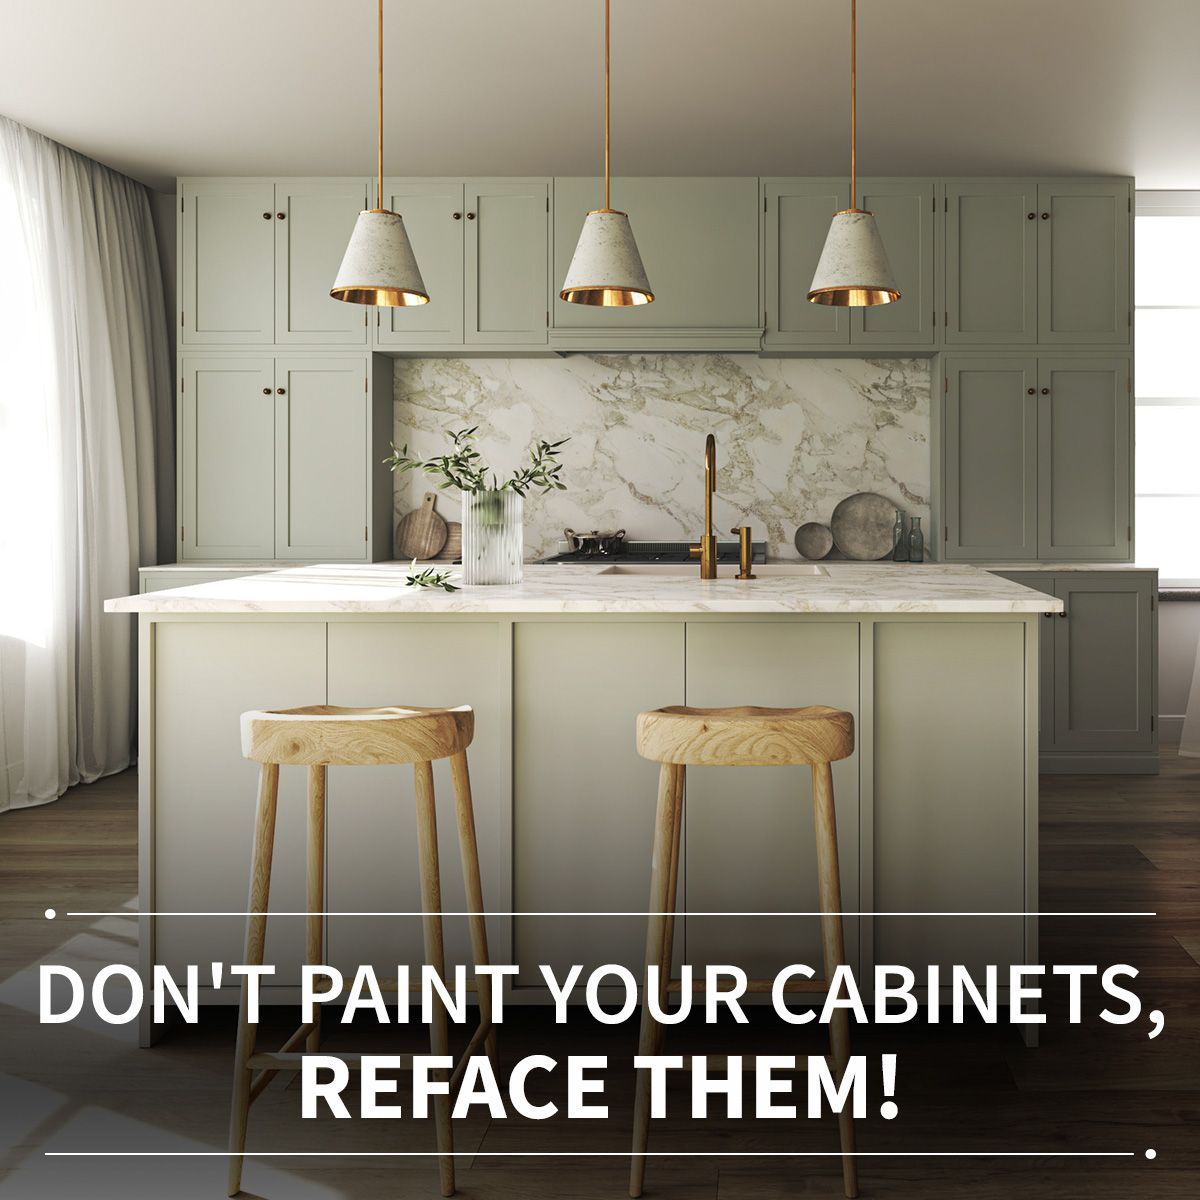 Don't Paint Your Cabinets, Reface Them!